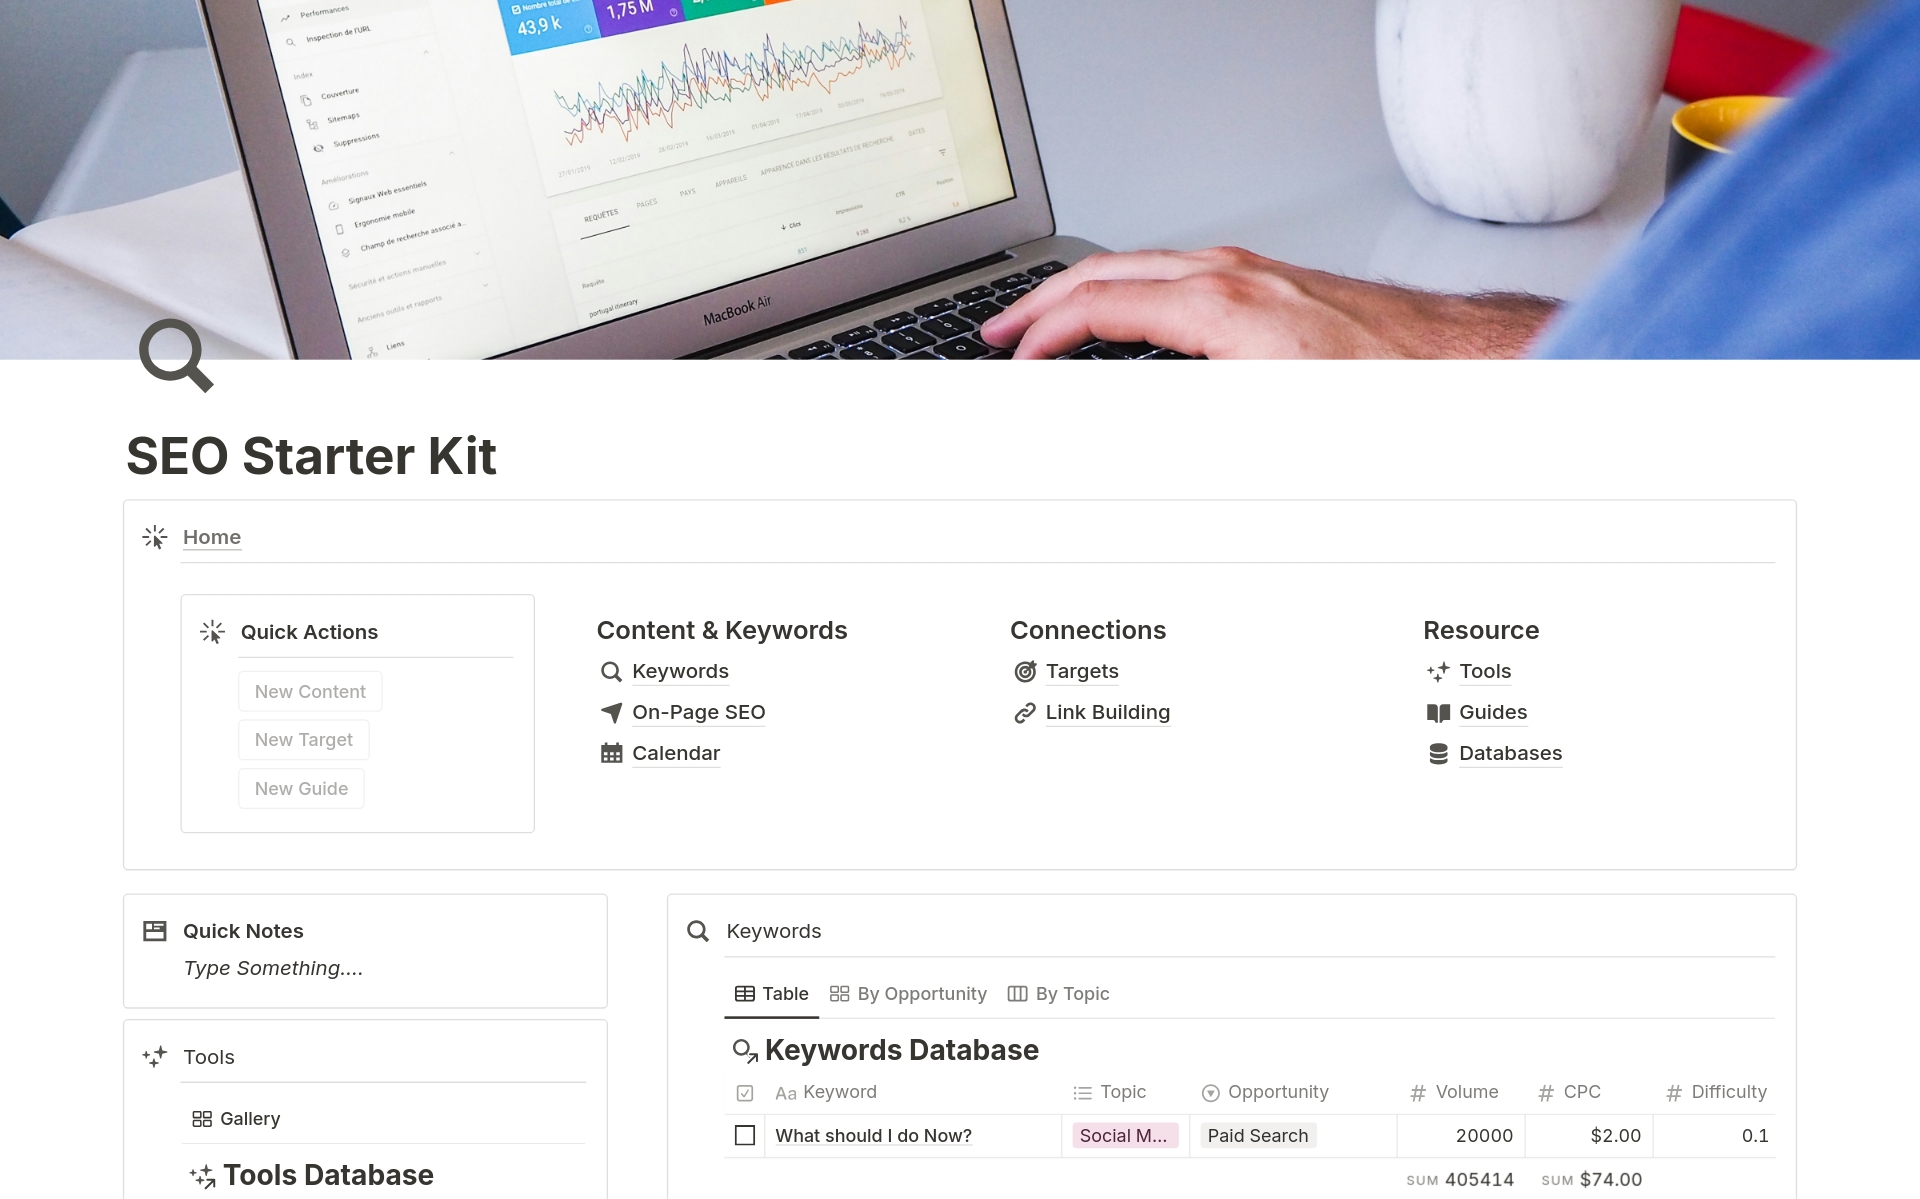 Unleash the potential of your business with our Keyword Mastery Notion Template. Streamline SEO research, boost rankings, and captivate your target audience effortlessly. Take the first step towards online domination today.